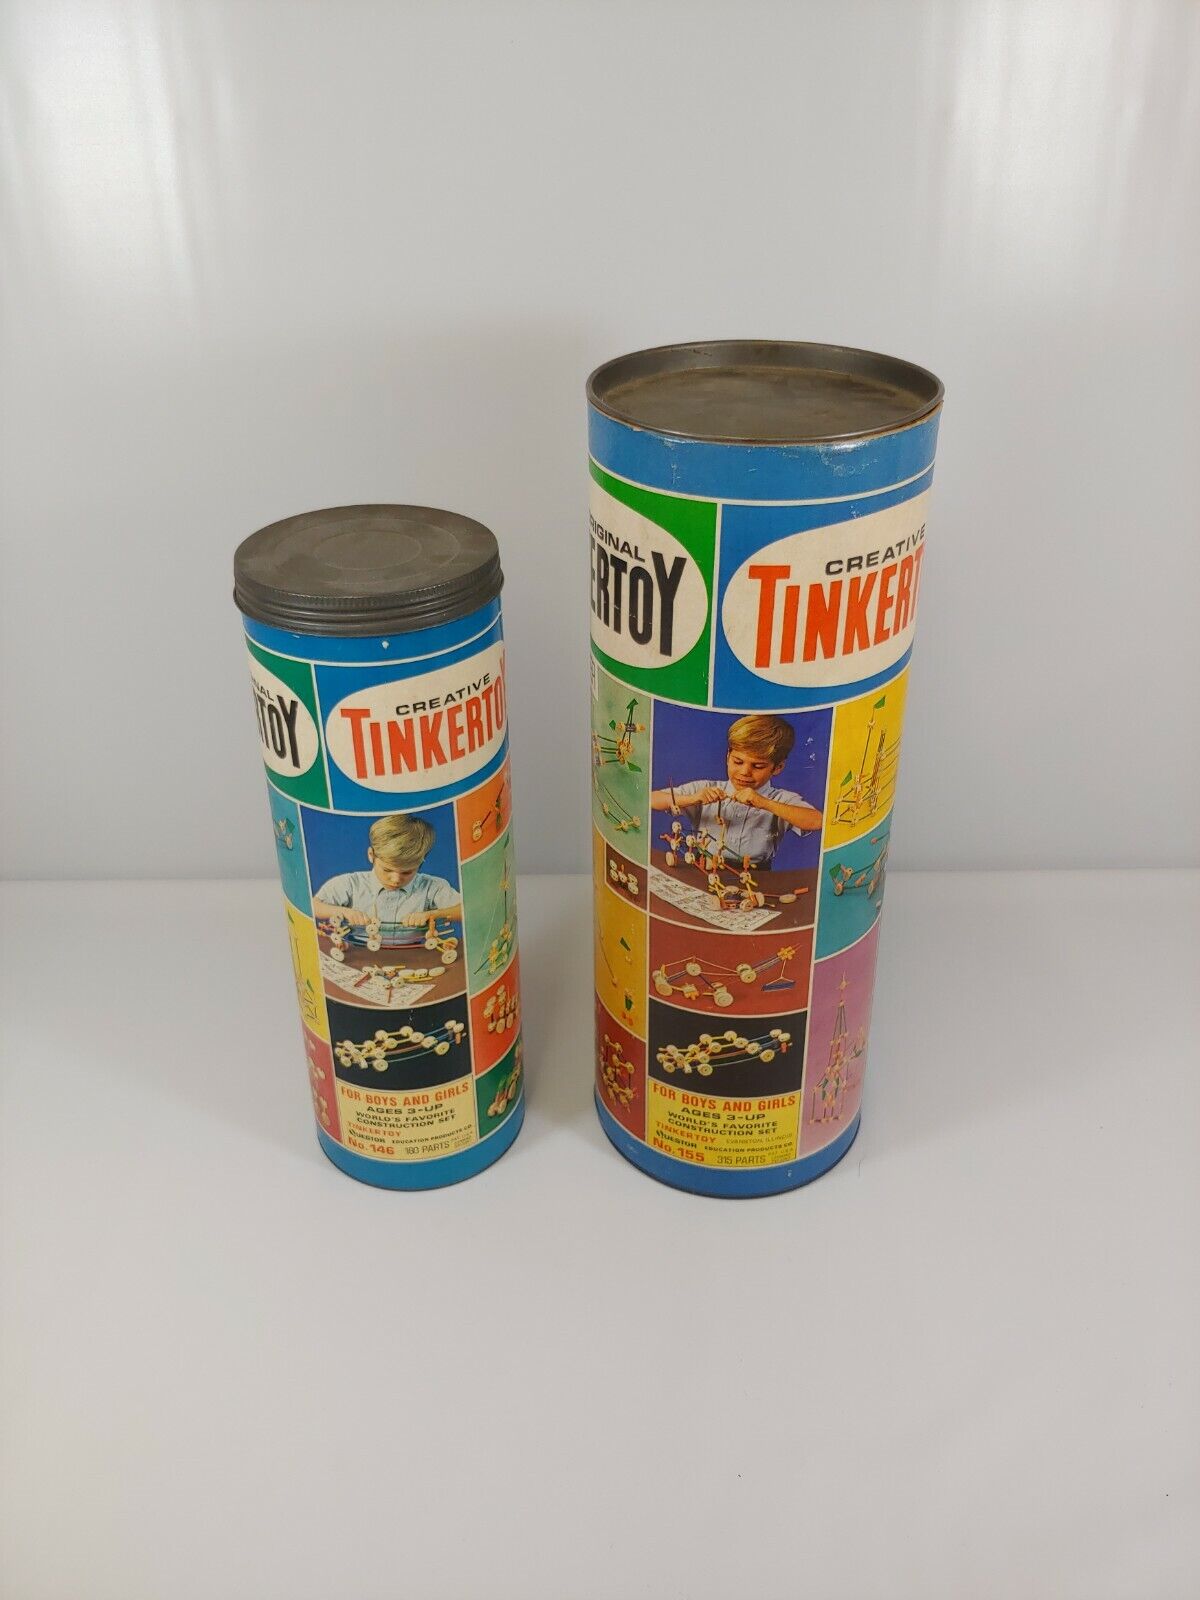 2x TinkerToy Tins, Pieces & Parts - #146 & #155 - Quester Educational Products